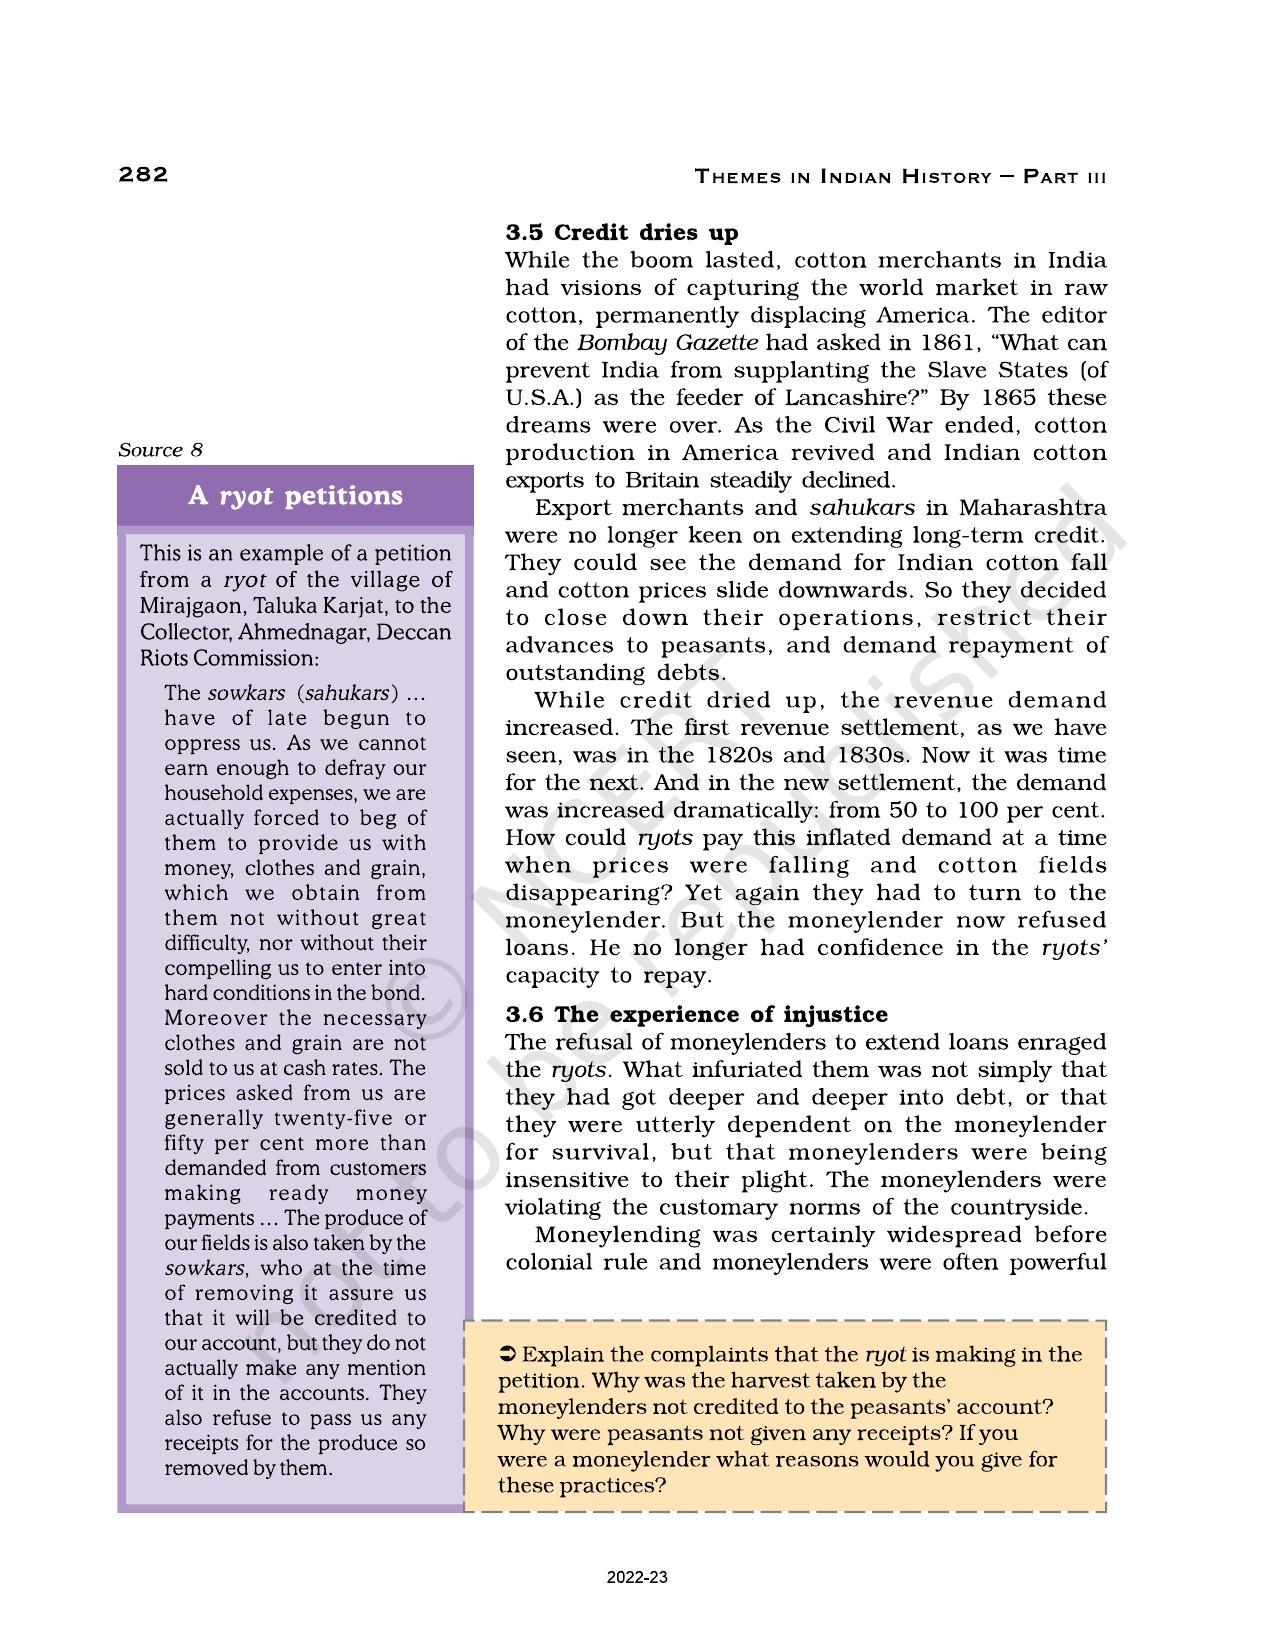 NCERT Book for Class 12 History (Part-II) Chapter 10 Colonialism and the Countryside - Page 26